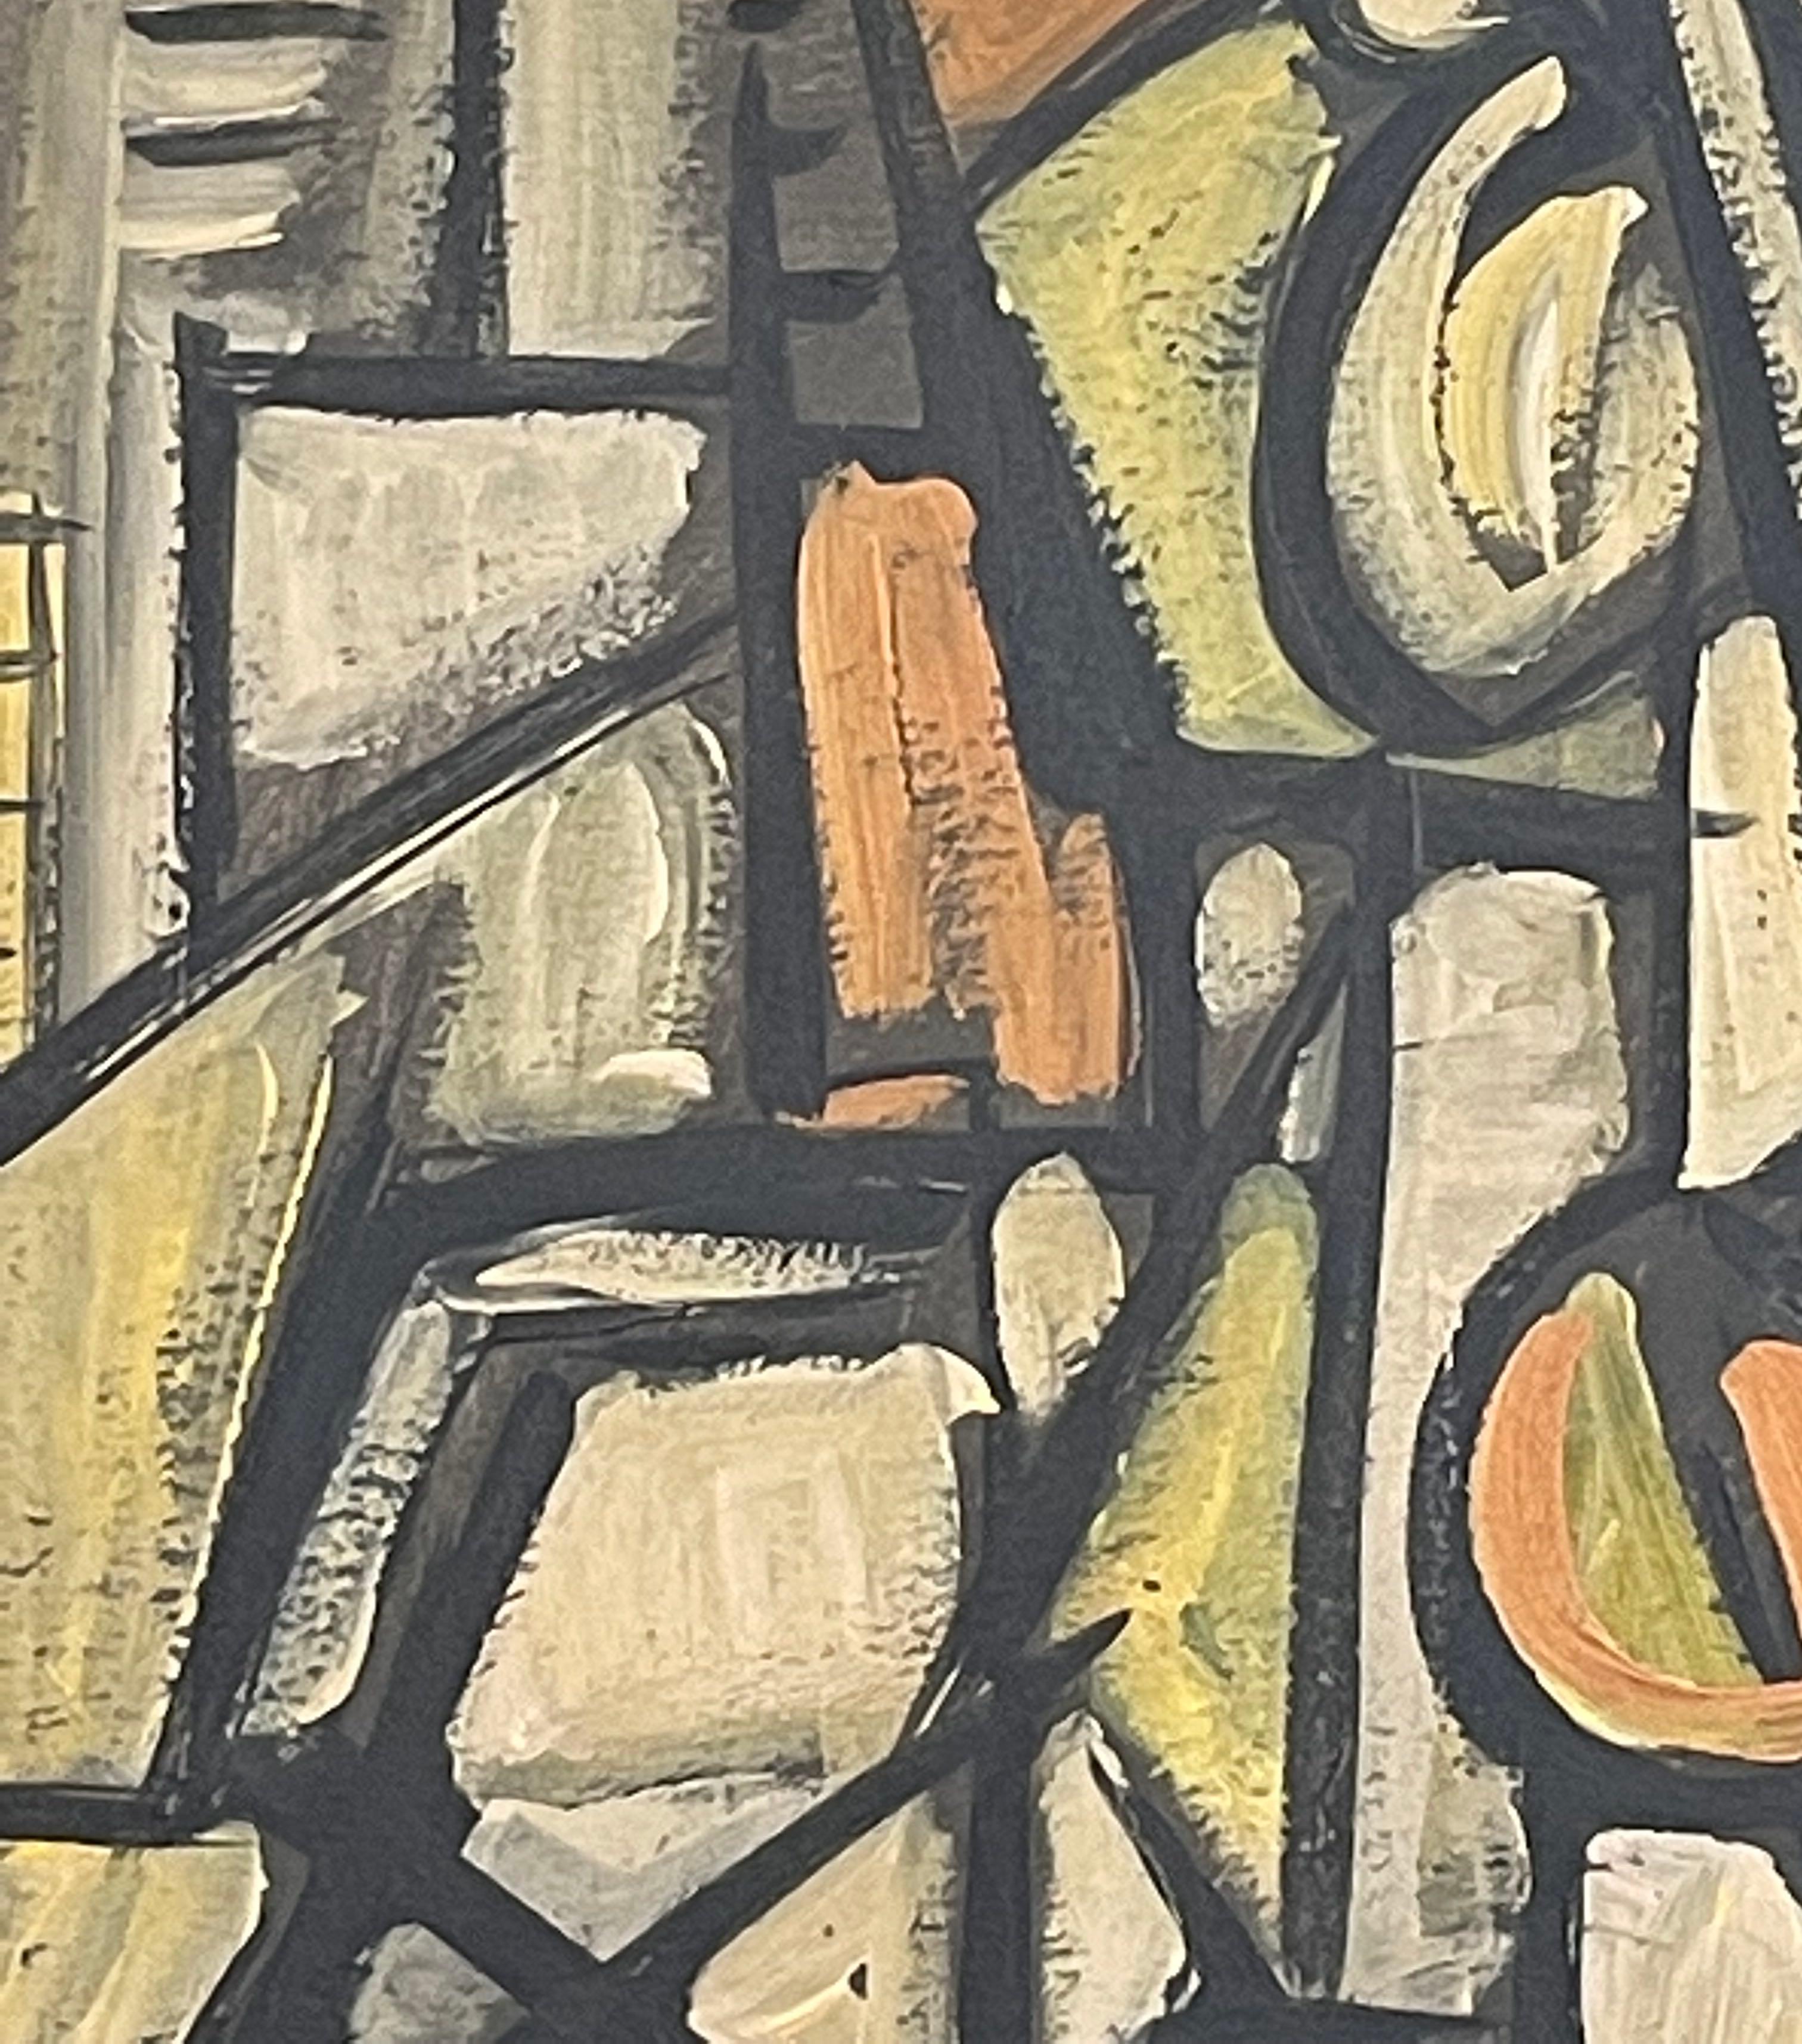 1930s Dutch school of art abstract painting.
Signed by artist STM.
Newly framed art floating on linen backing.
From a large collection of work.